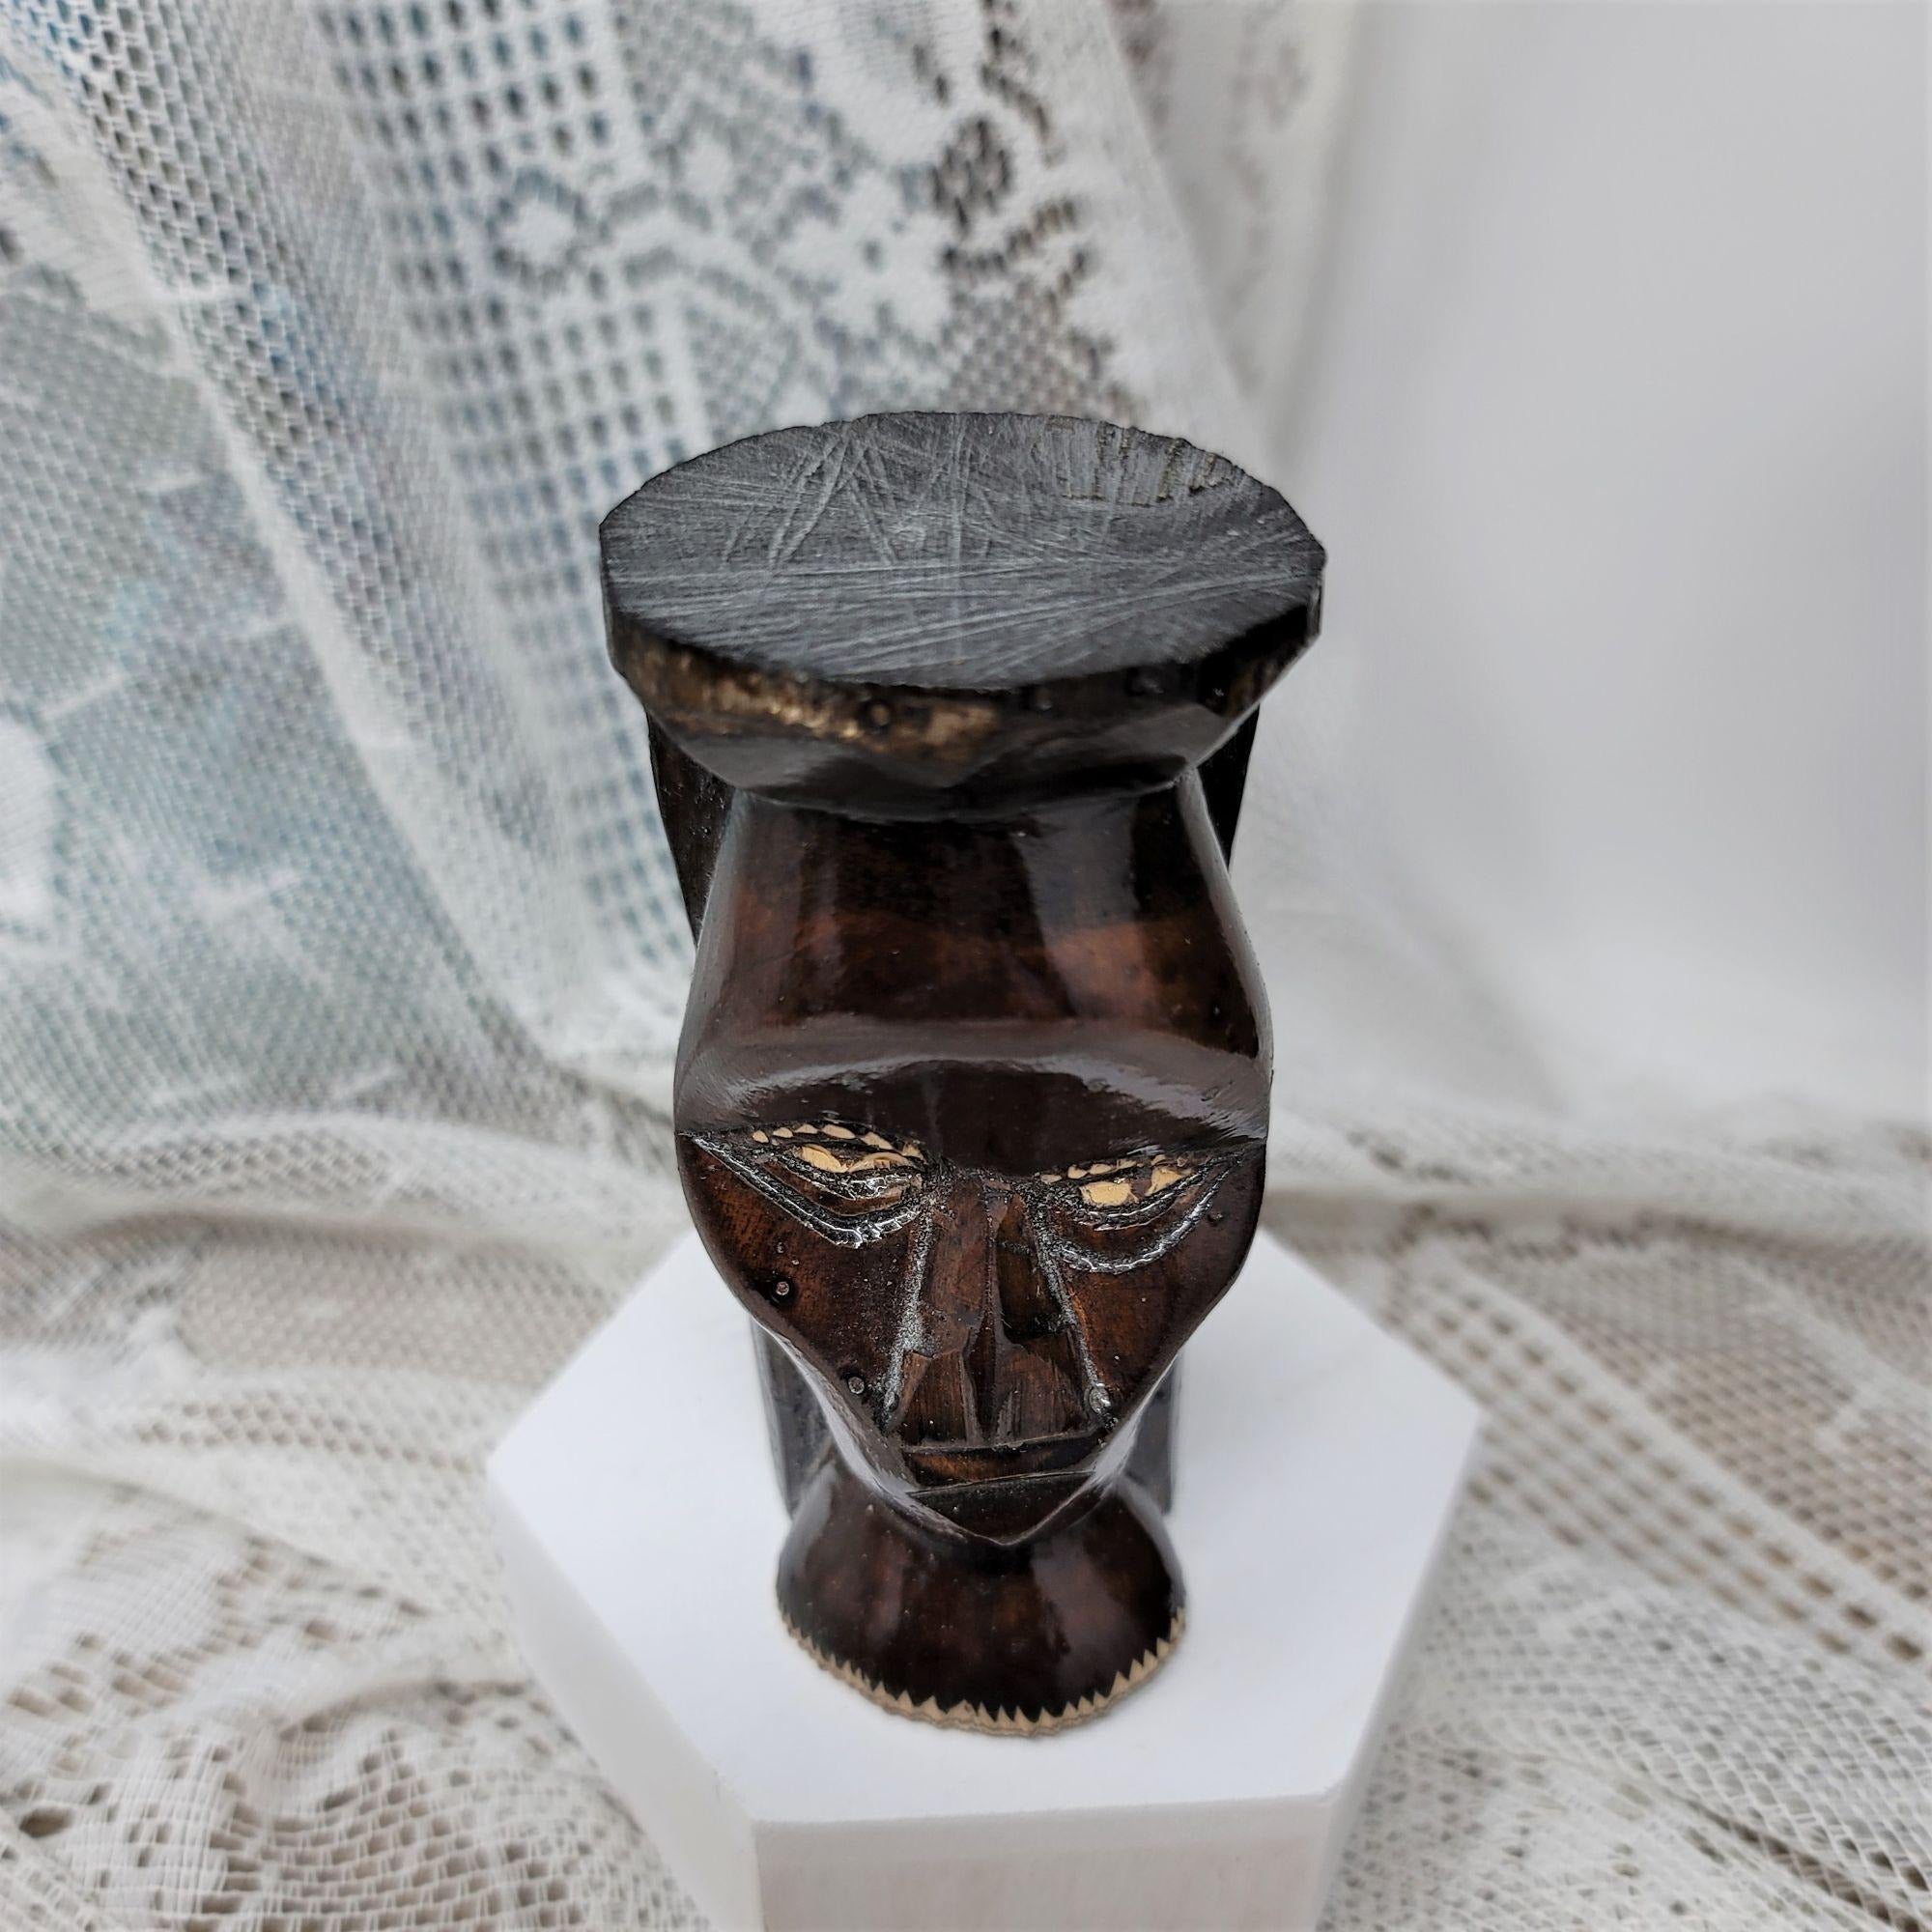 Hand Carved African Face Figurine Wood